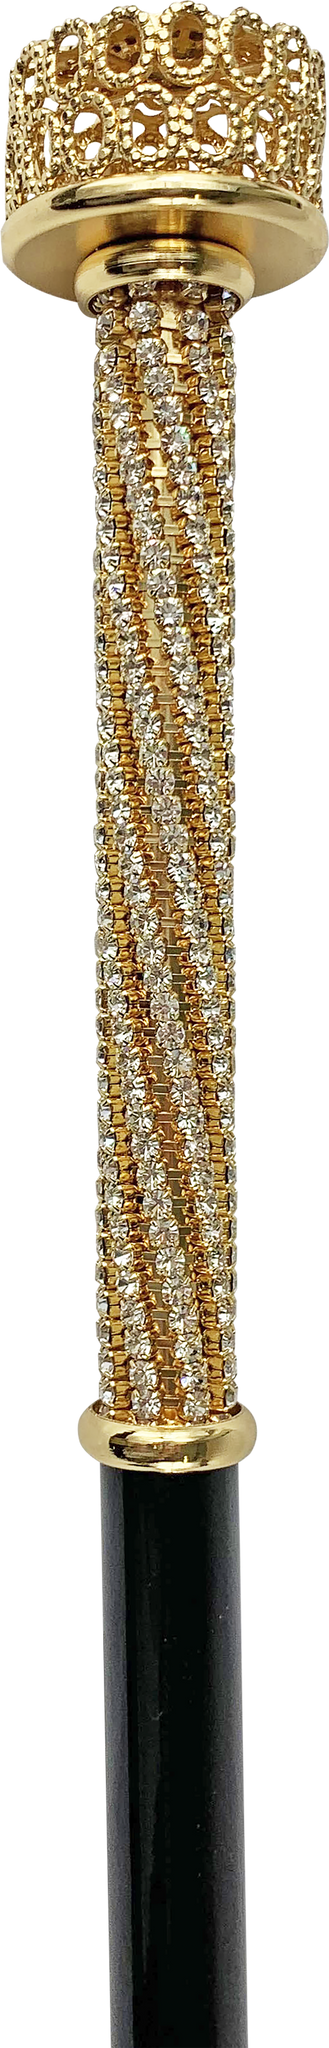 Milord Cane set with thousands of crystals